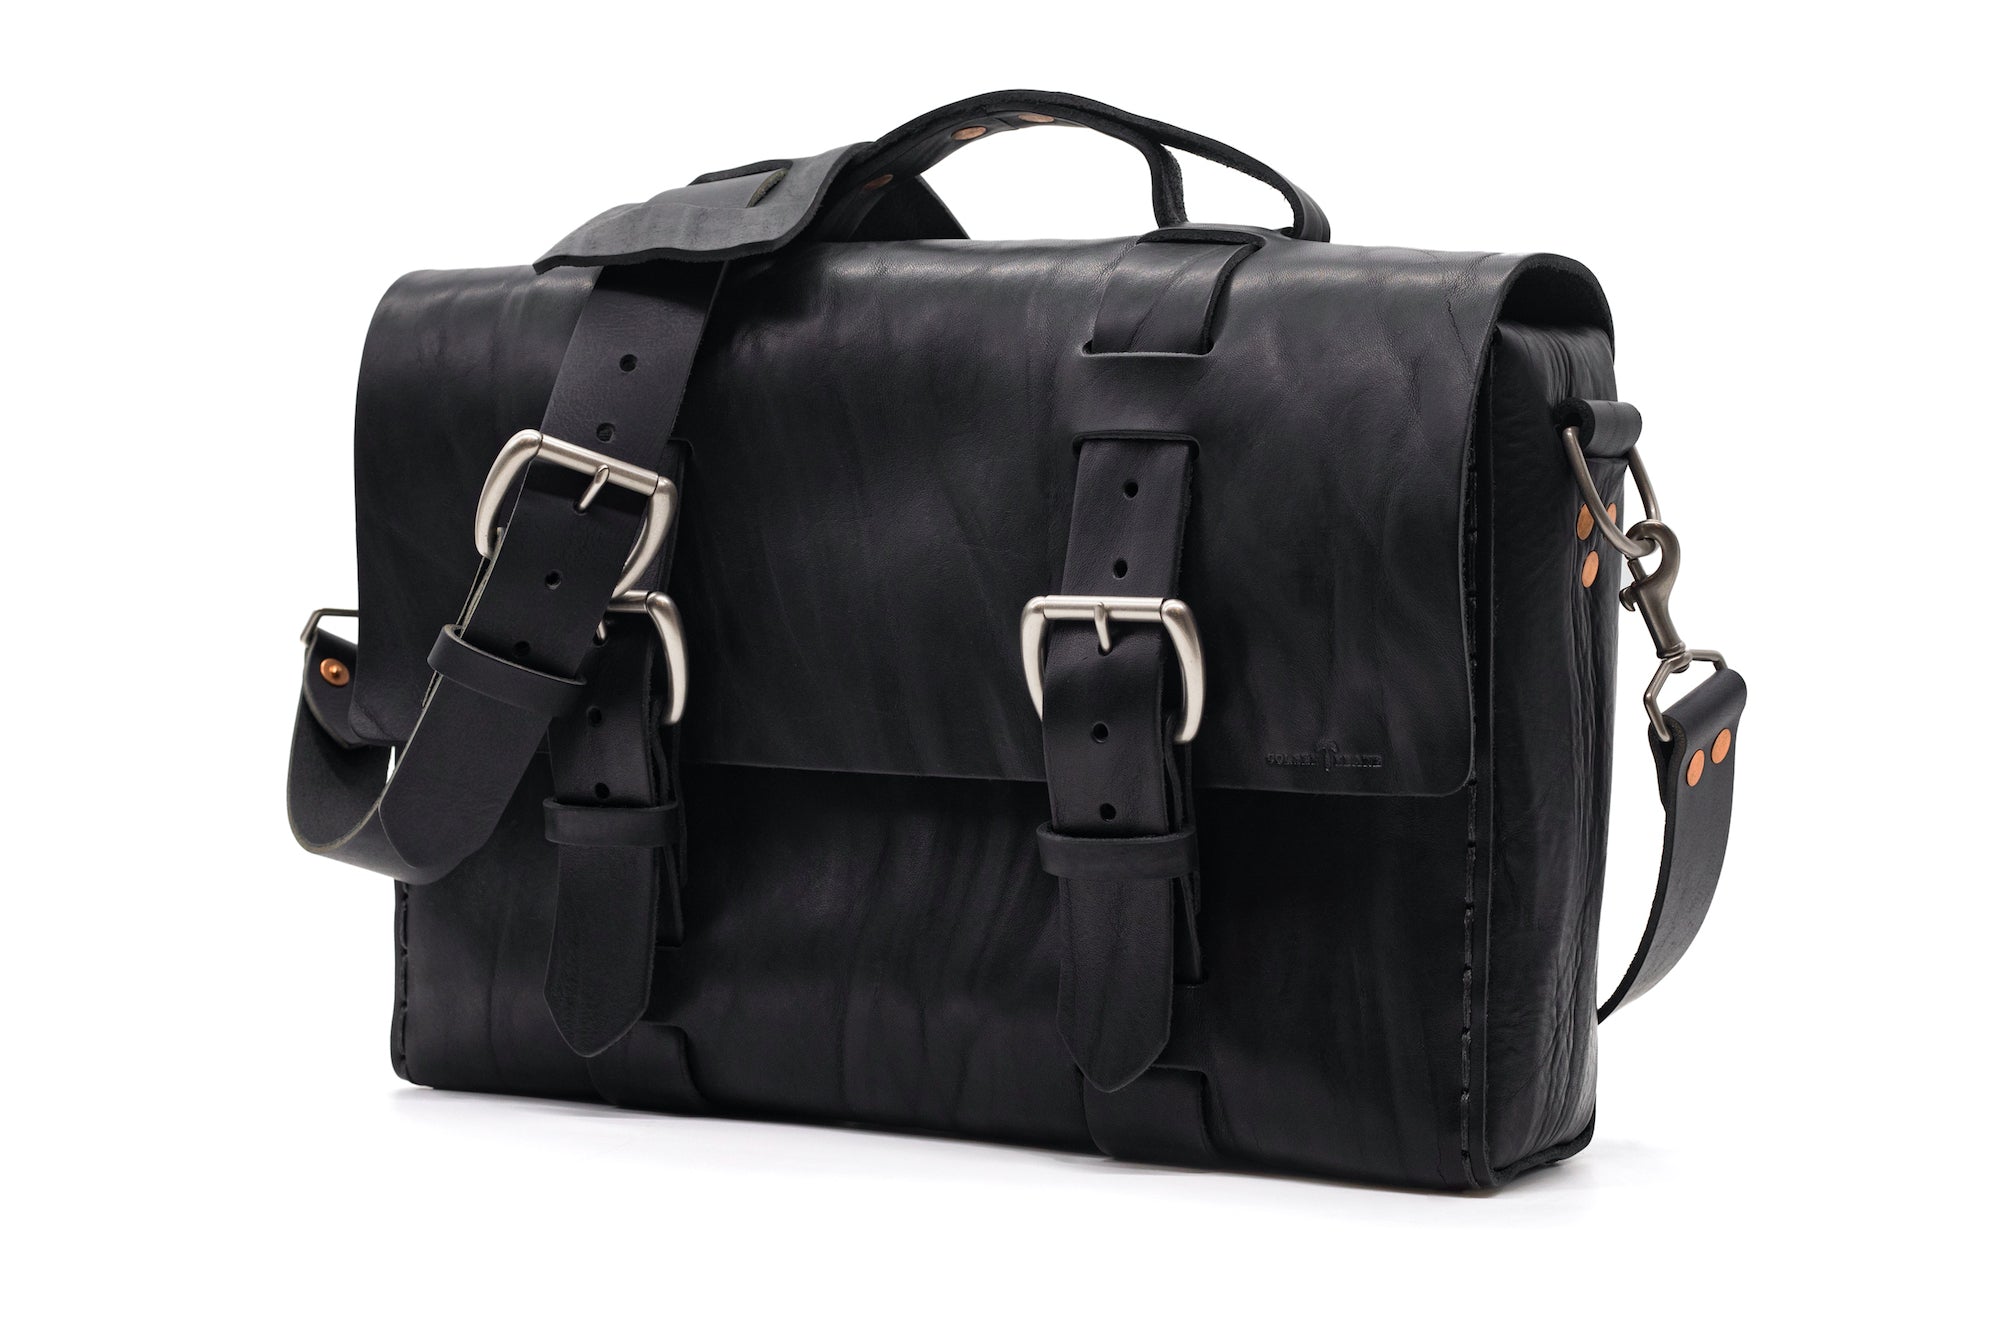 Limited Edition No. 4313 - Minimalist Standard Leather Satchel in Commonwealth Black - 5 MADE, ONLY 3 LEFT